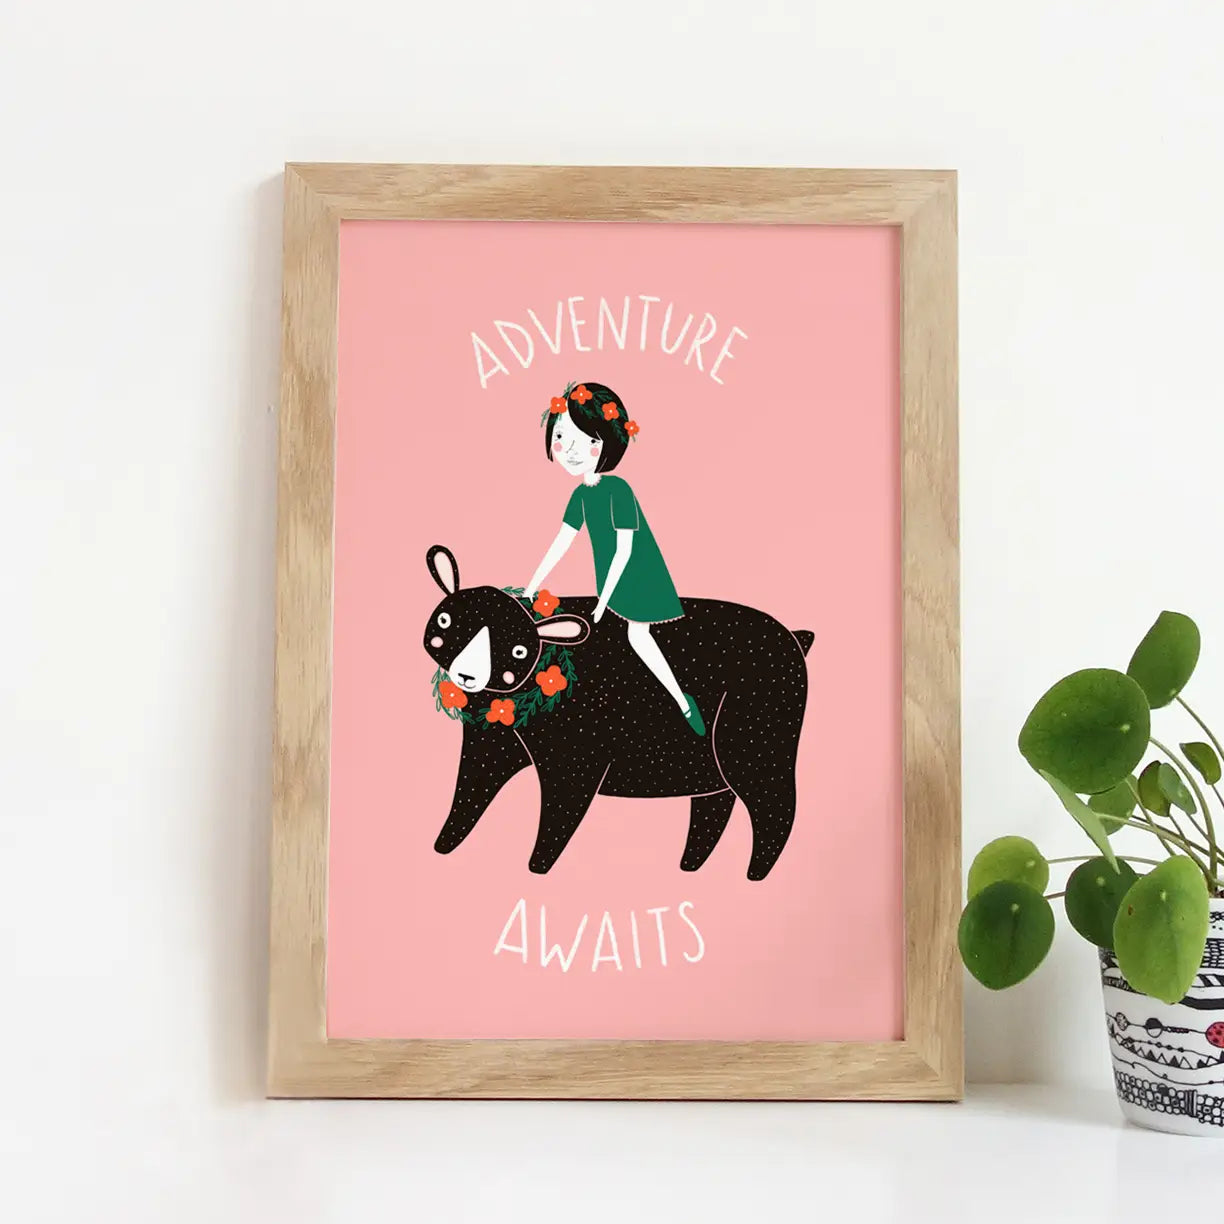 Art print with pink background and illustration of a kid on a black bear. White text reads "adventure awaits" 